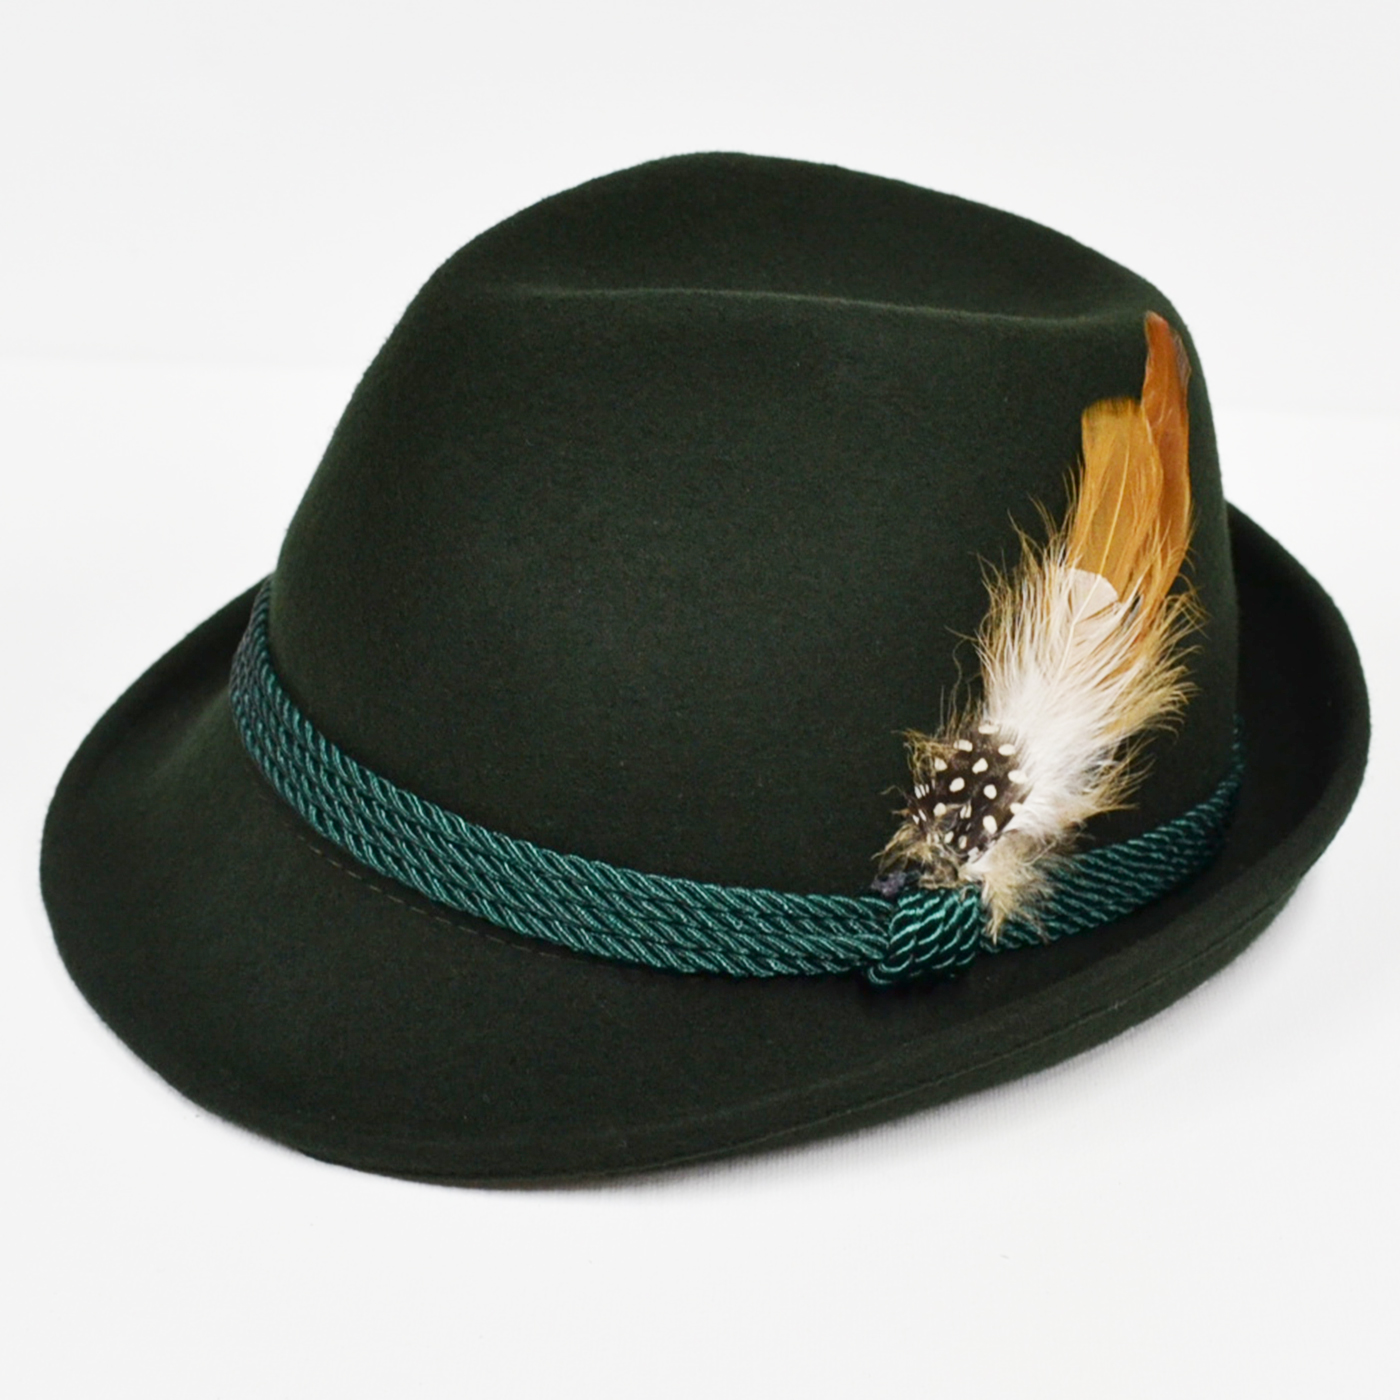 Green felt hat with a brown feather. Imported from Germany.